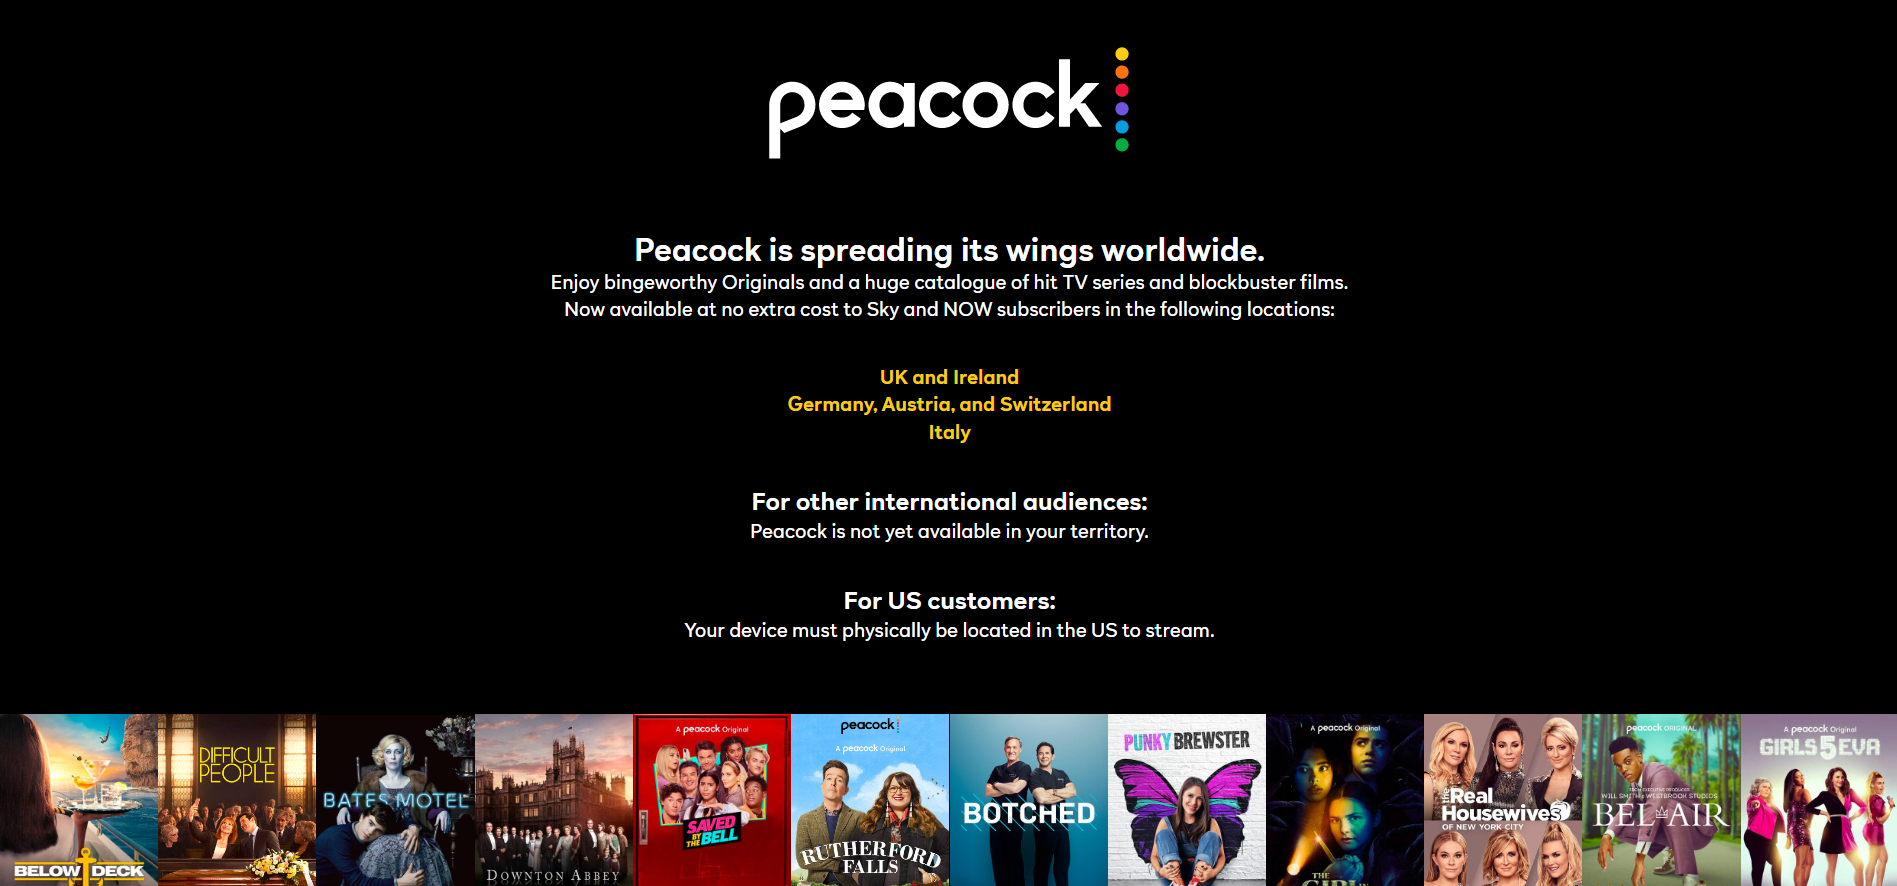 peacock tv : How To Update Peacock TV On Amazon Fire Stick